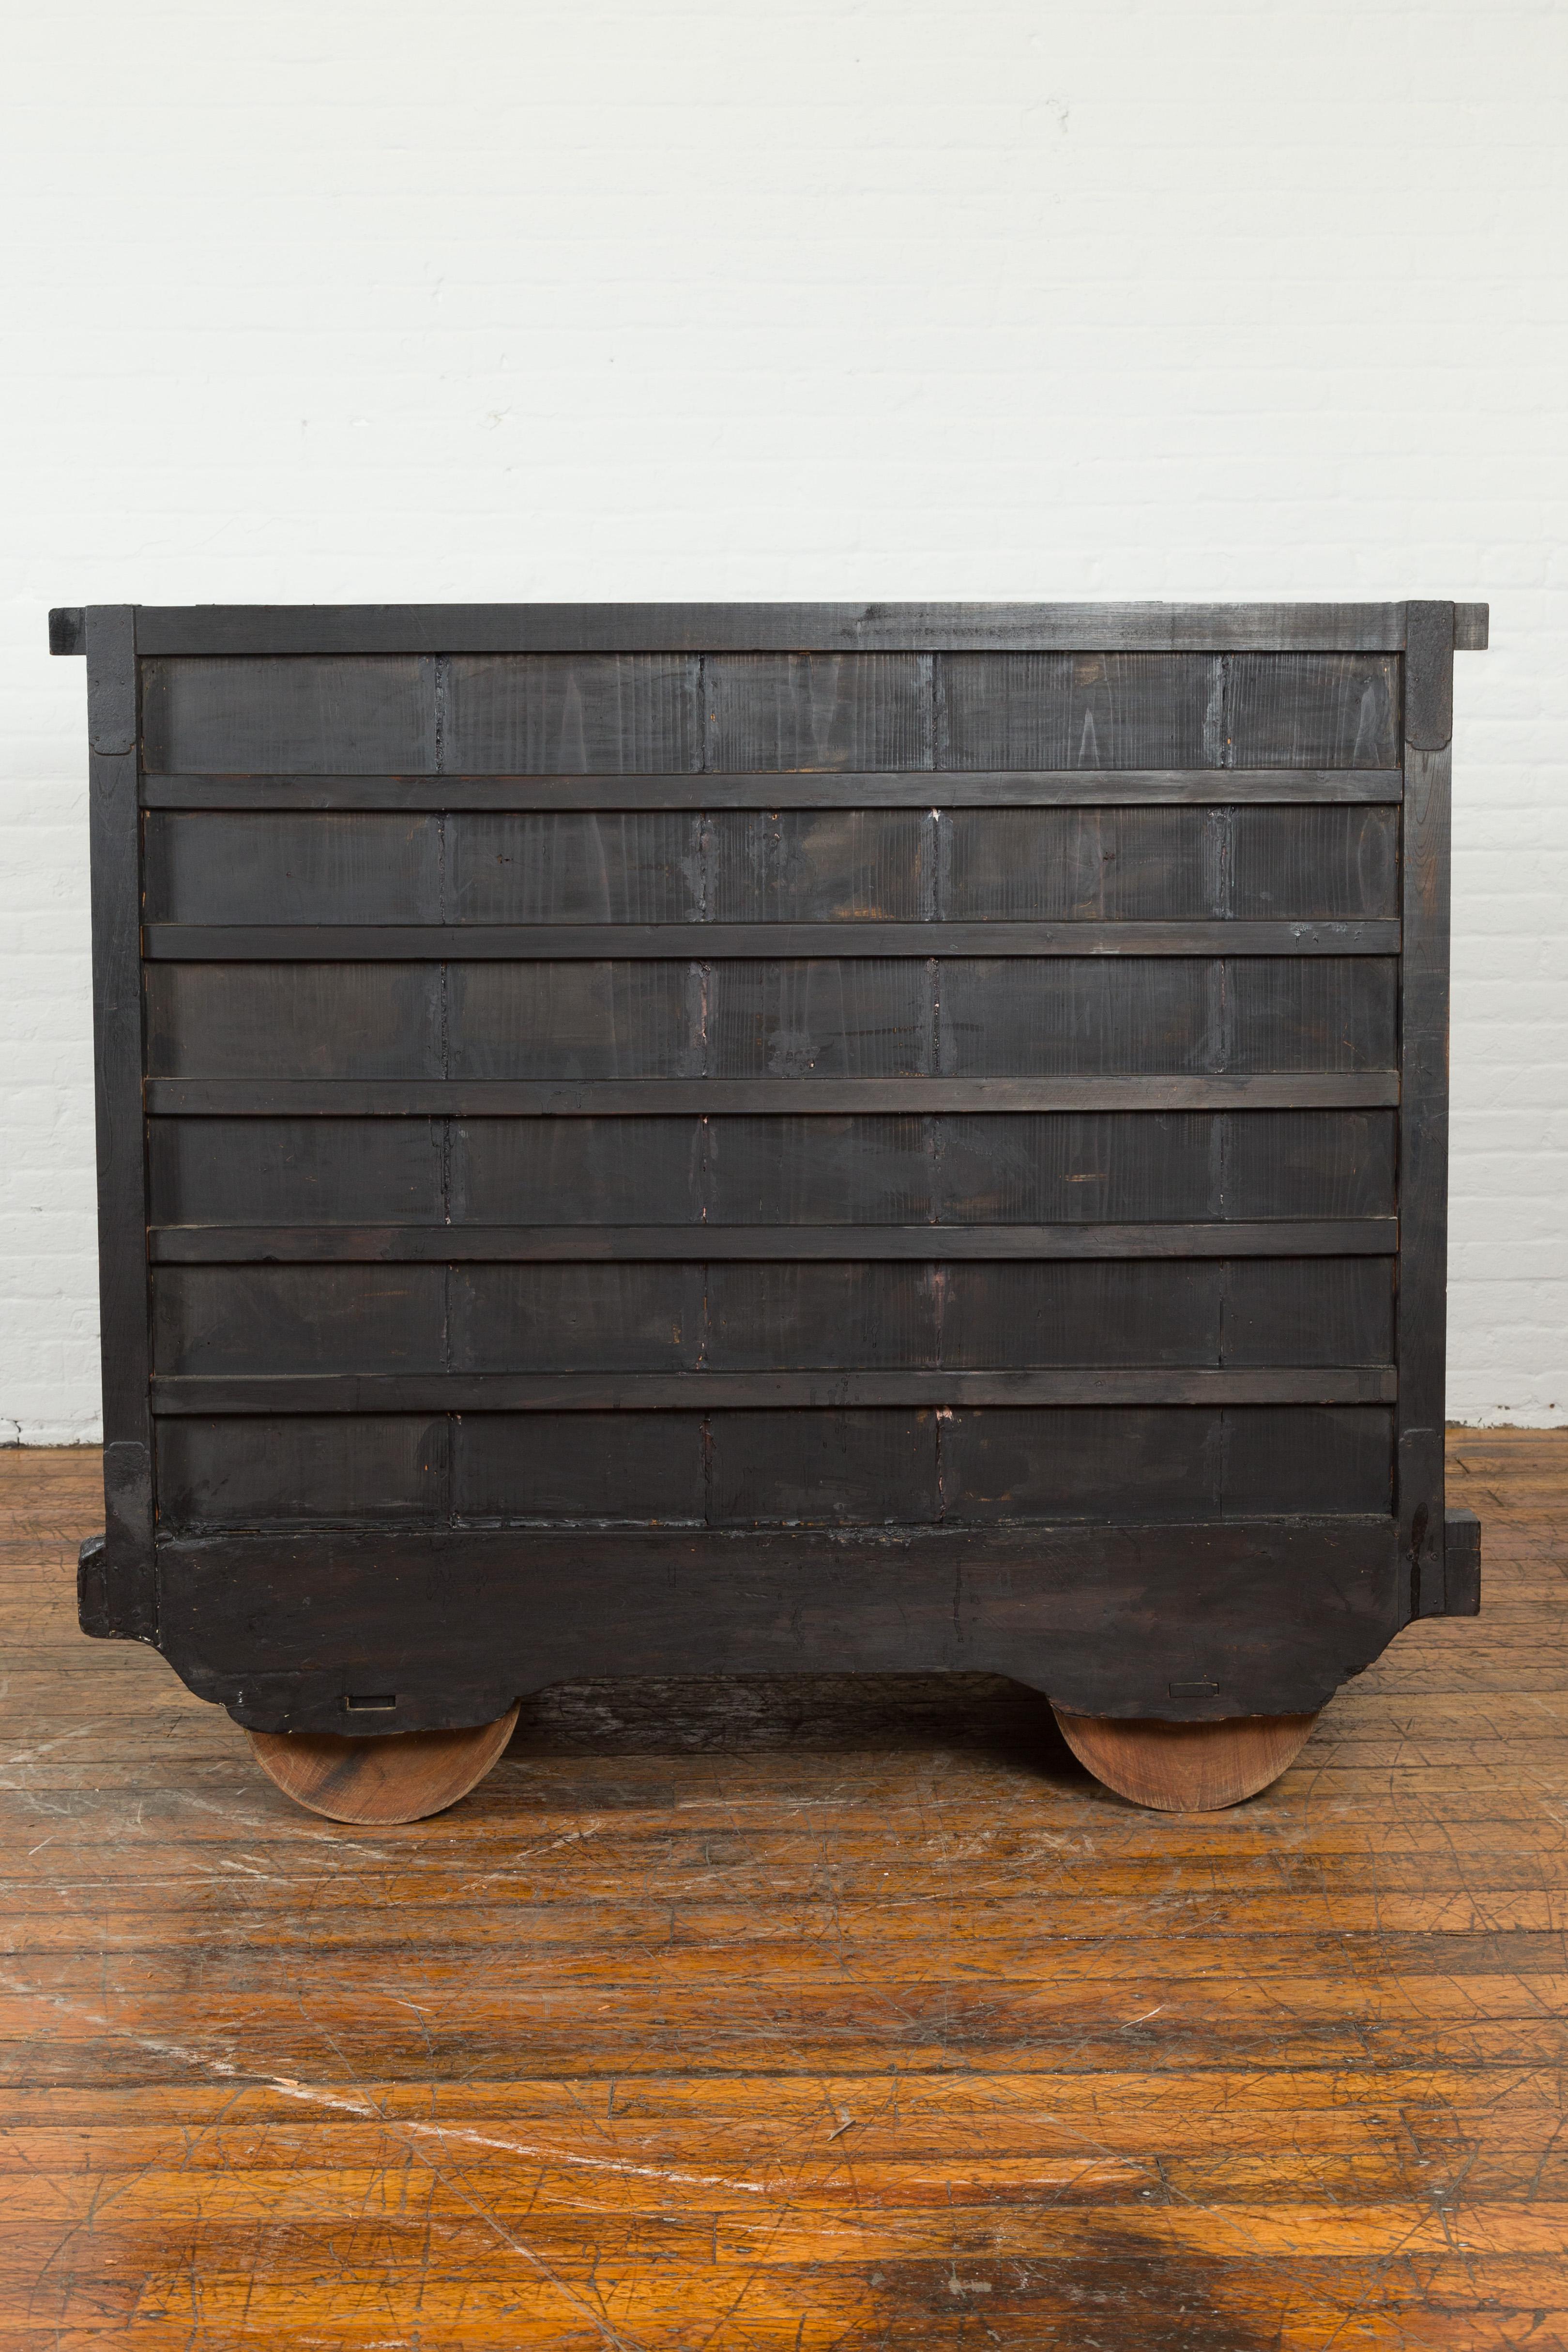 Japanese Meiji Period Late 19th Century Merchant's Chest with Safe on Wheels 6